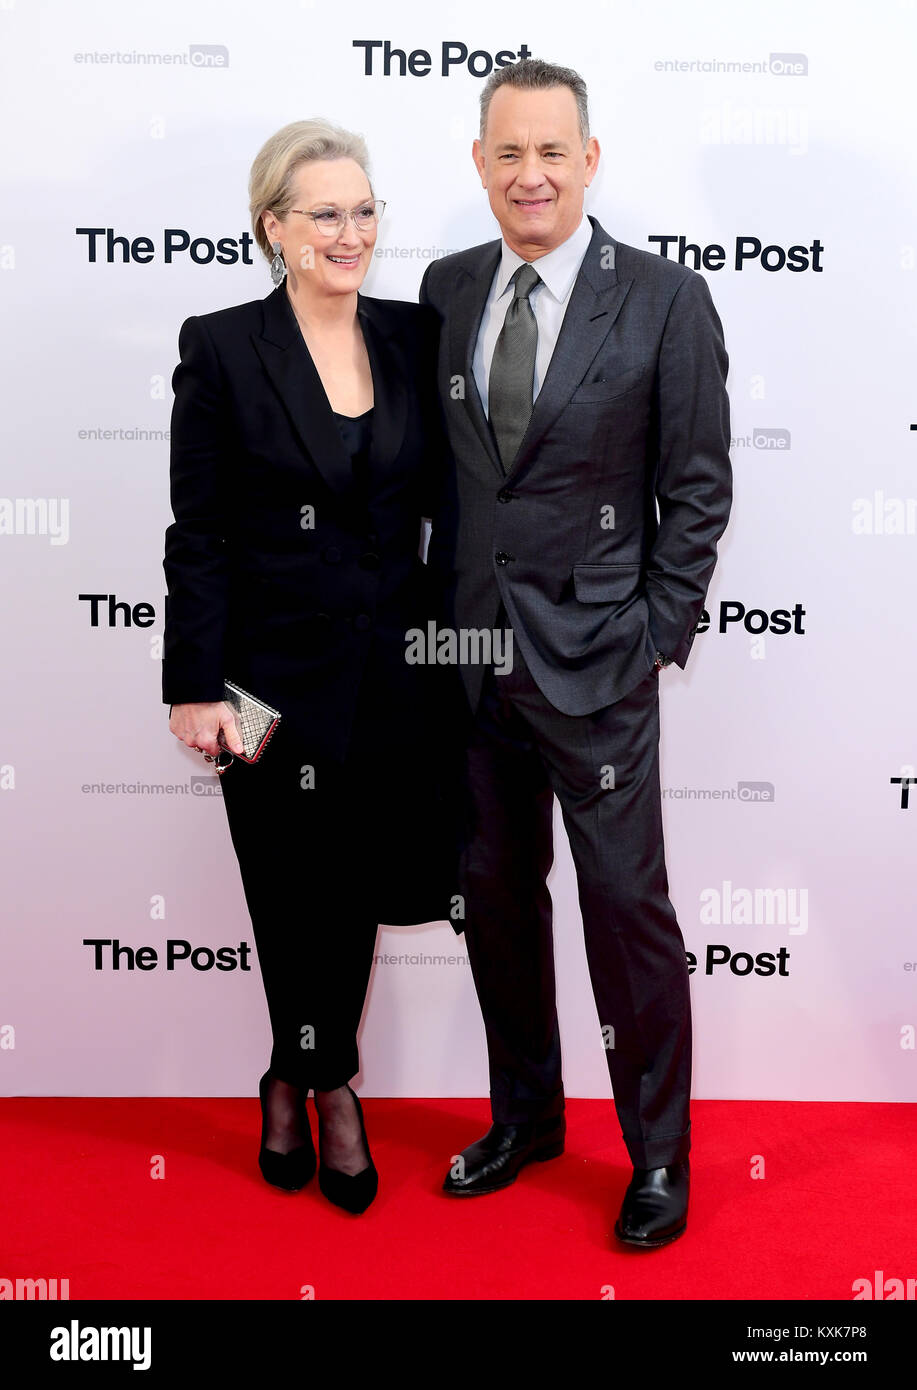 Meryl Streep and Tom Hanks attending The Post European Premiere at The Odeon Leicester Square, London. Stock Photo